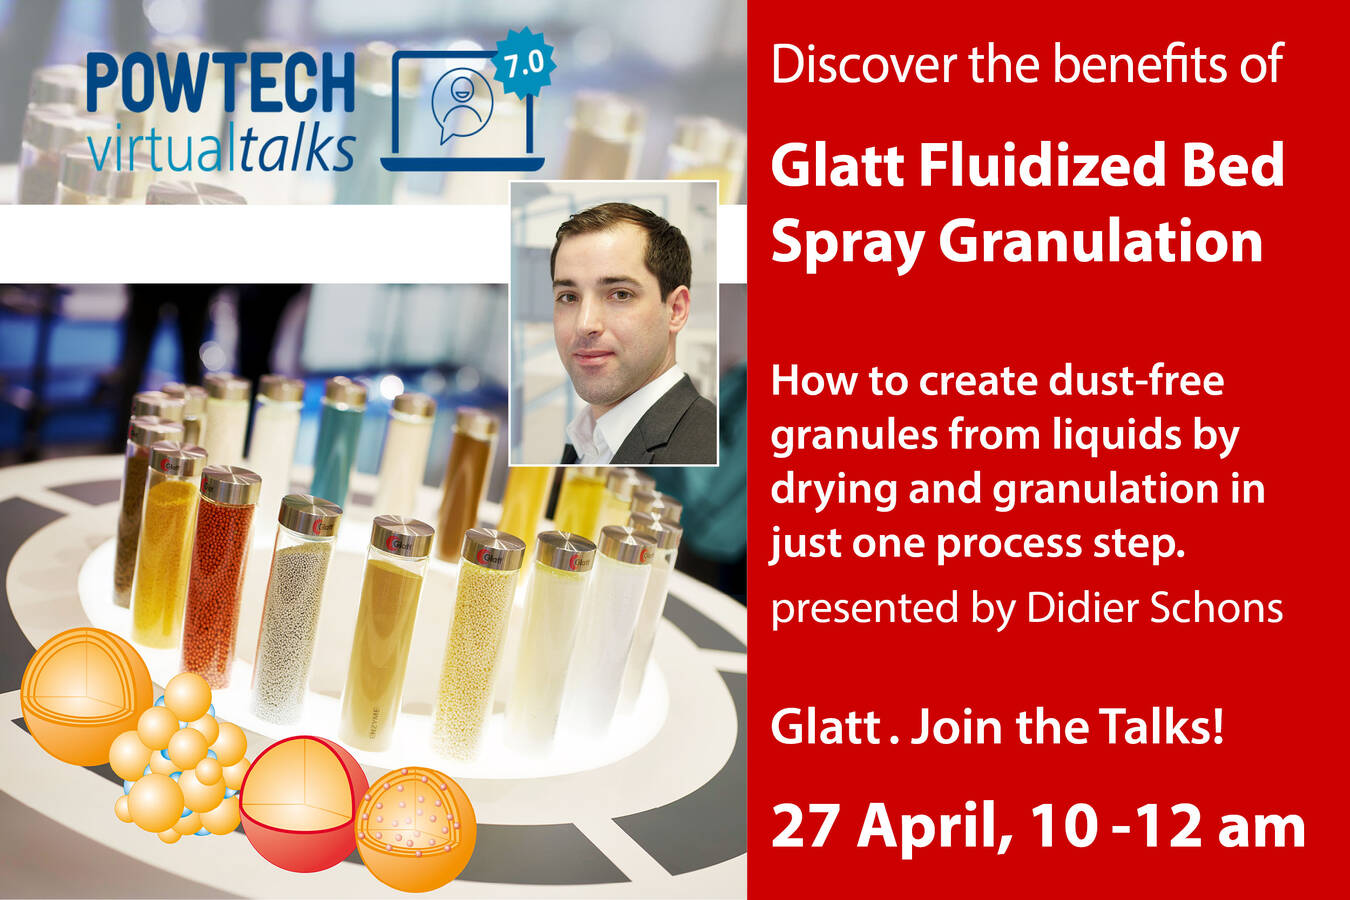 Creating dustfree granules by drying + granulating liquids Join the POWTECH Nuernberg Virtual Talks vol. 7